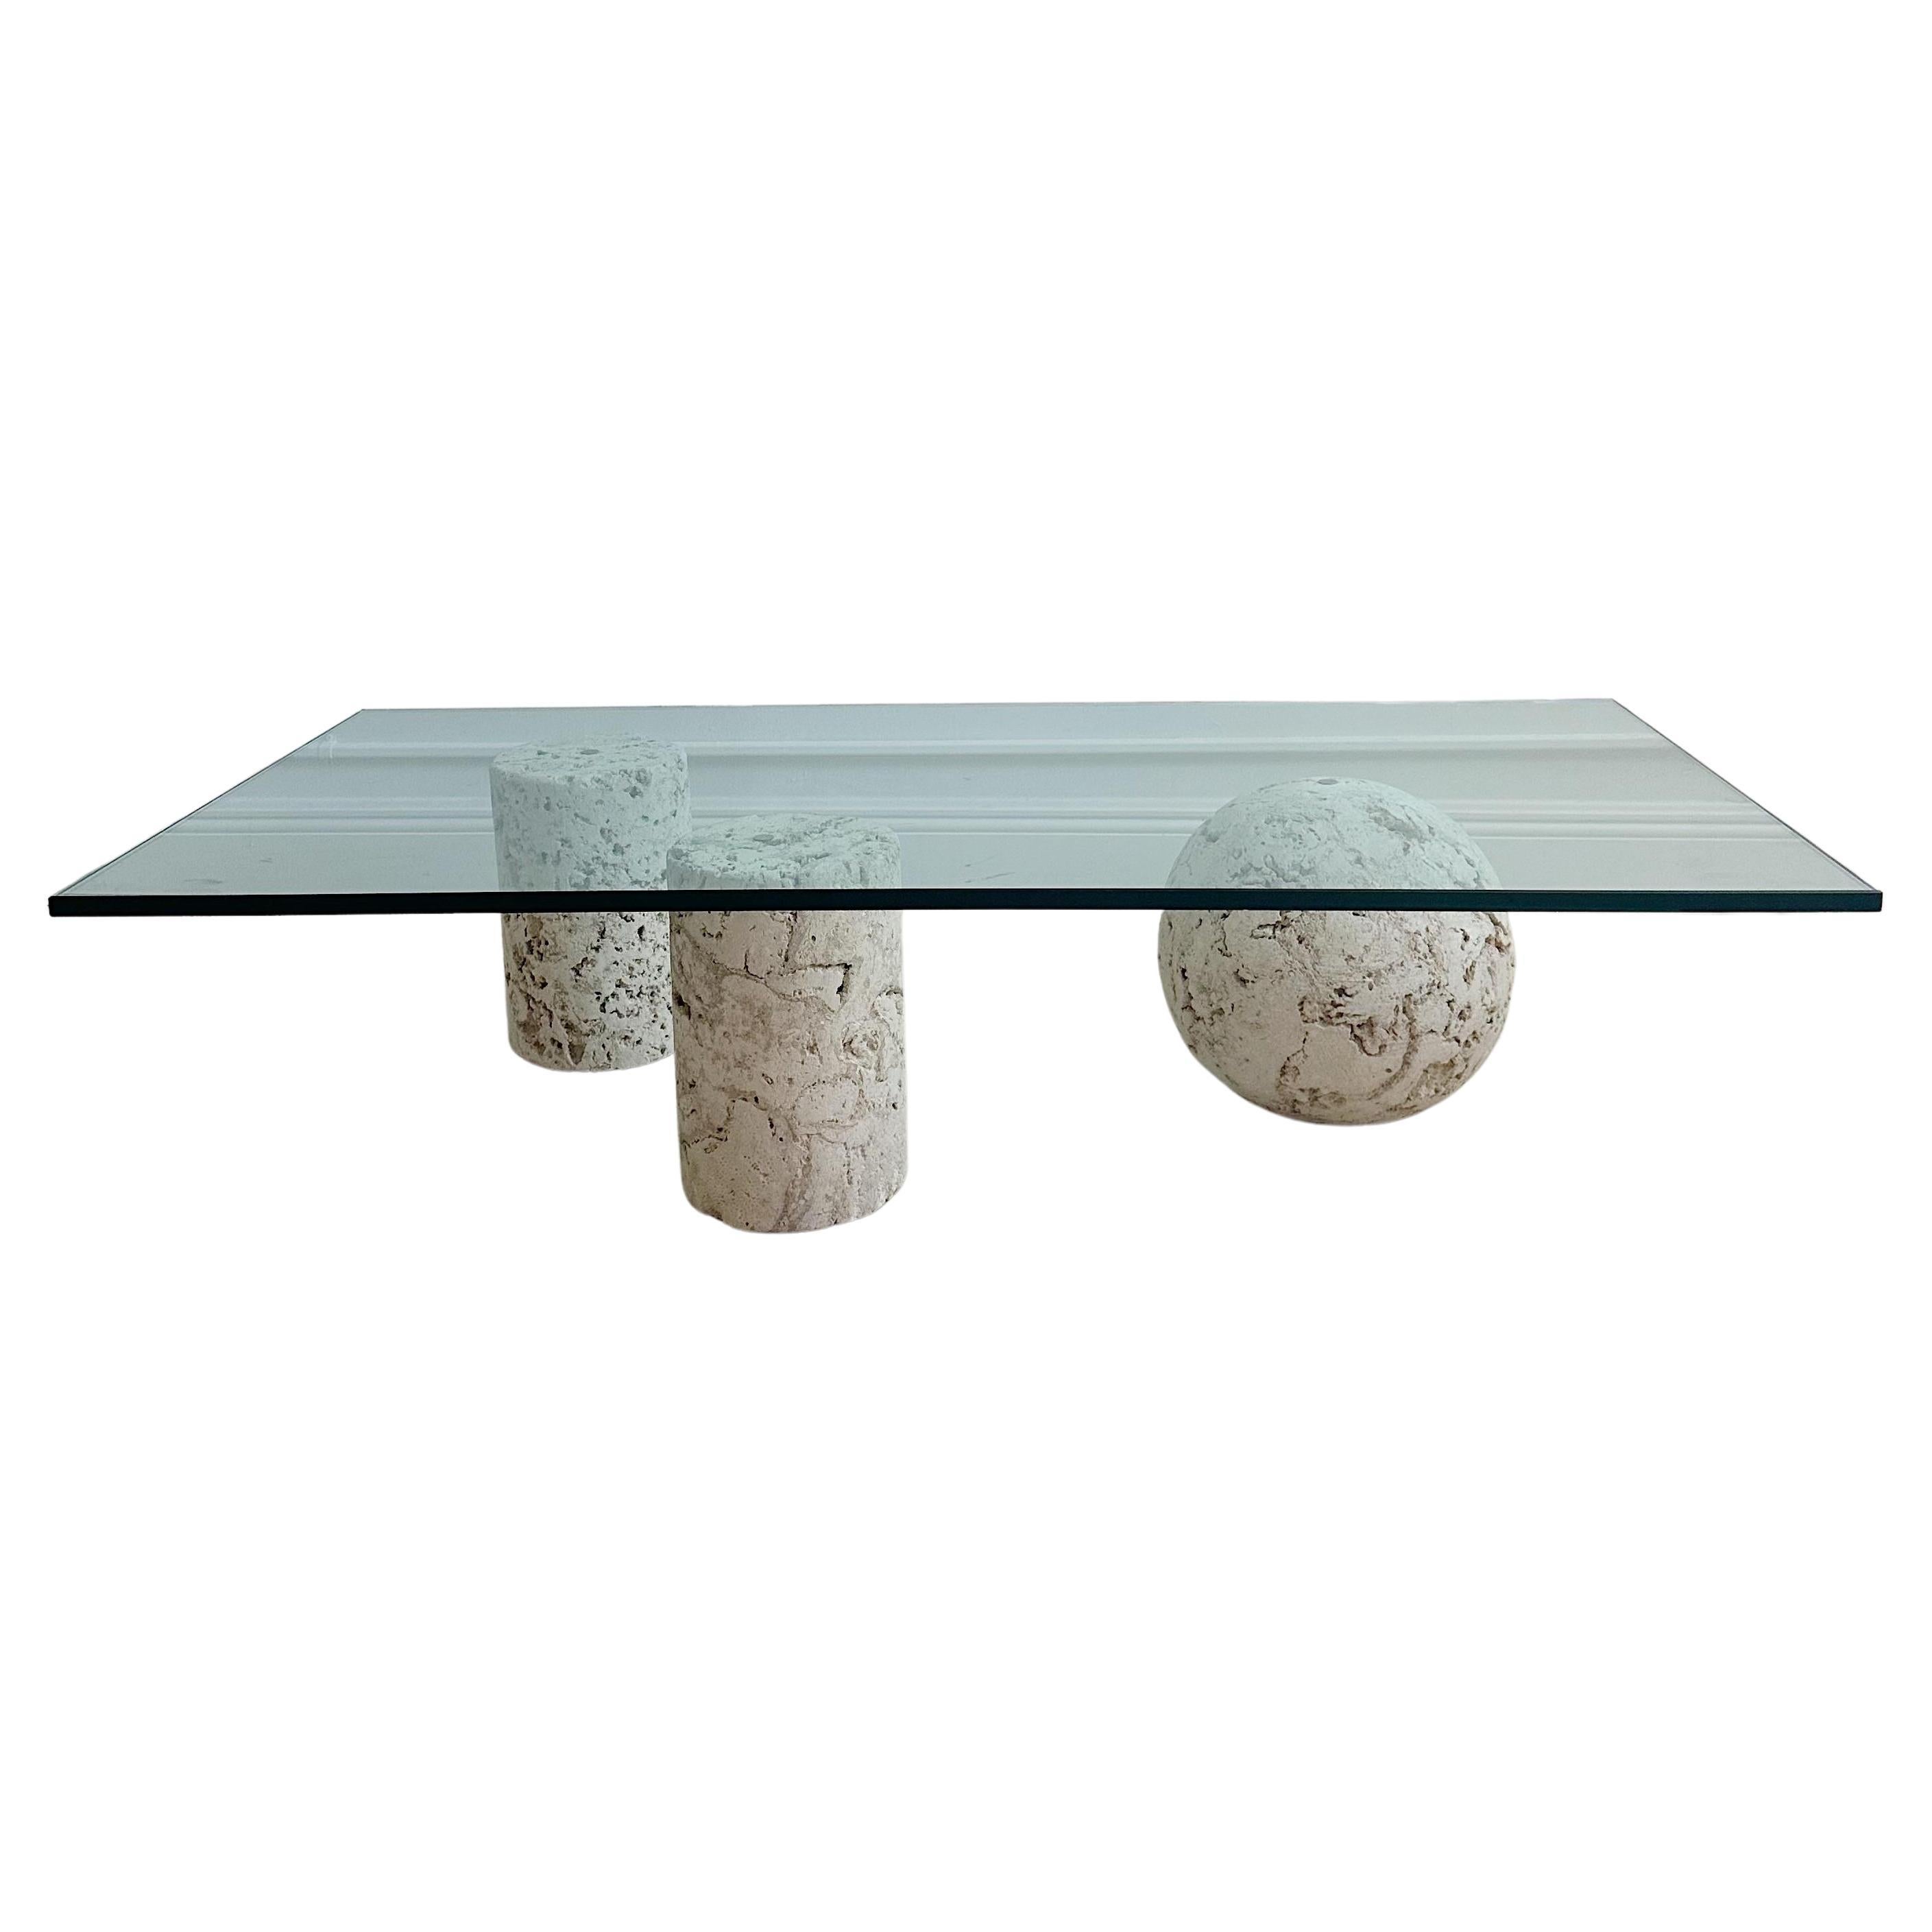 3 Piece Coquina Coral Stone Coffee Table For Sale